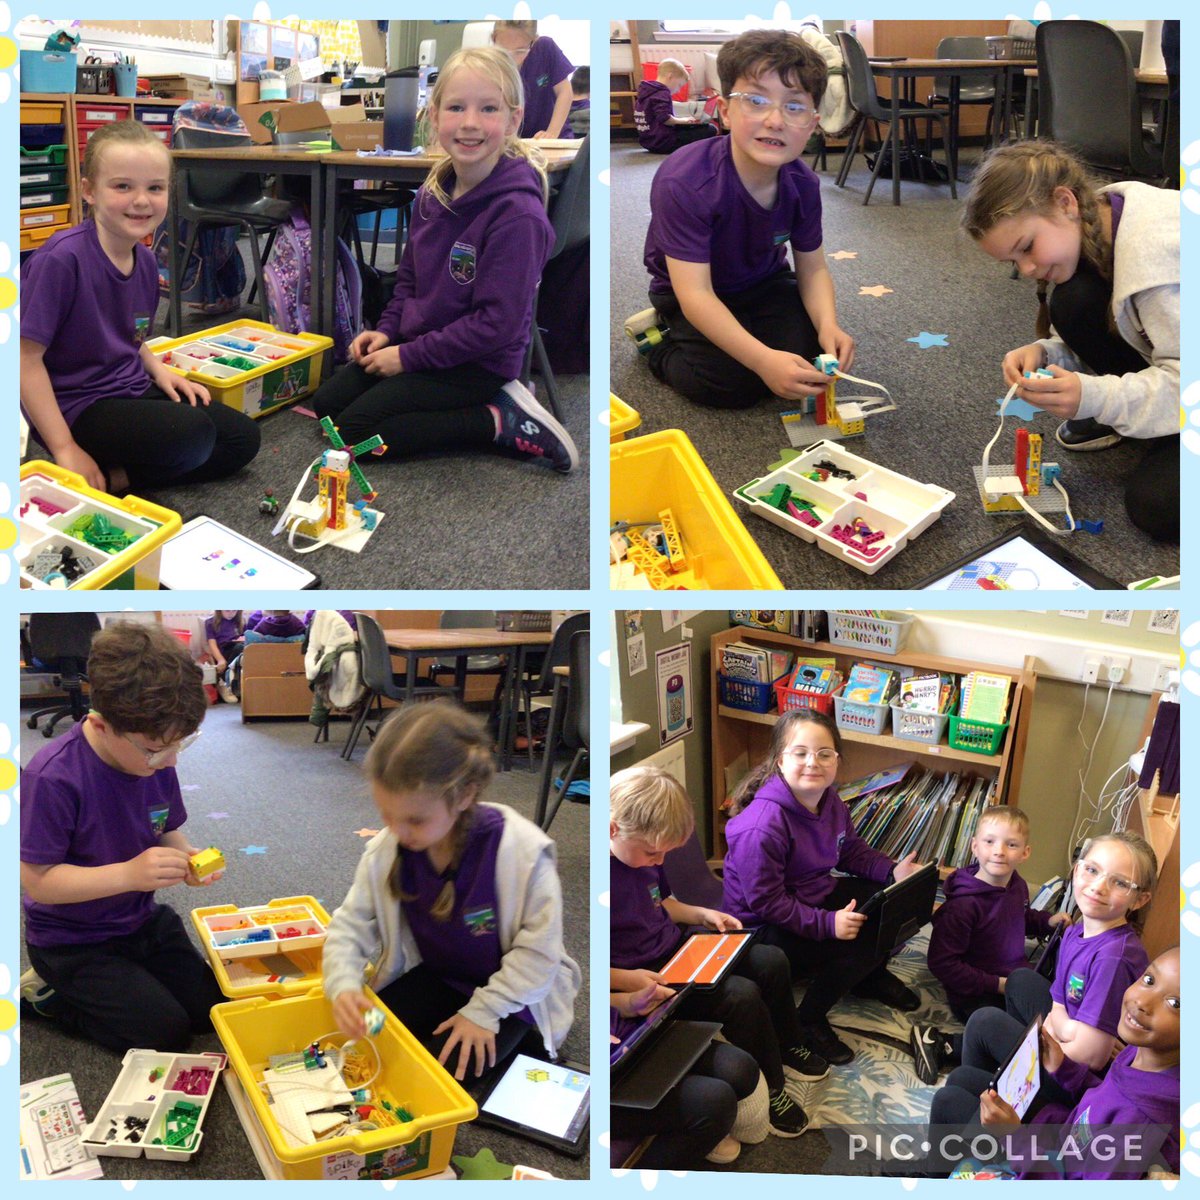 Primary 3 had an amazing Digital Afternoon after winning class of the week! They had so much fun creating and coding with the Lego Spikes! They created PowerPoints and Kahoots for the class too! @NLDigitalSchool @LEGO_Education